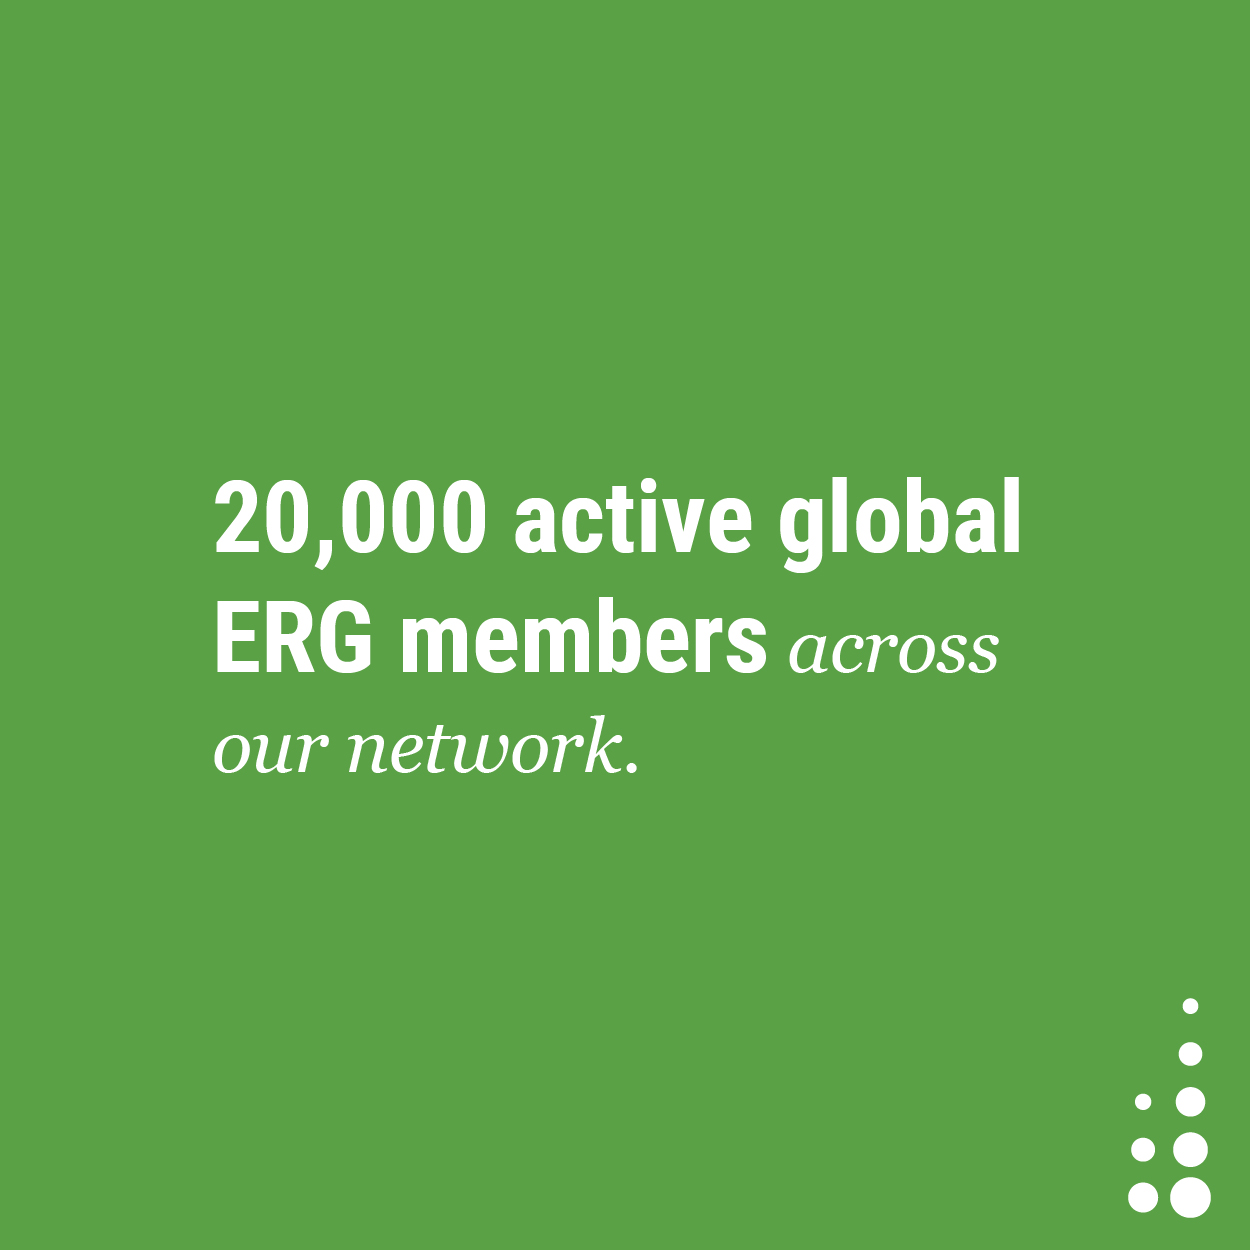 20,000 active global ERG members across our network.